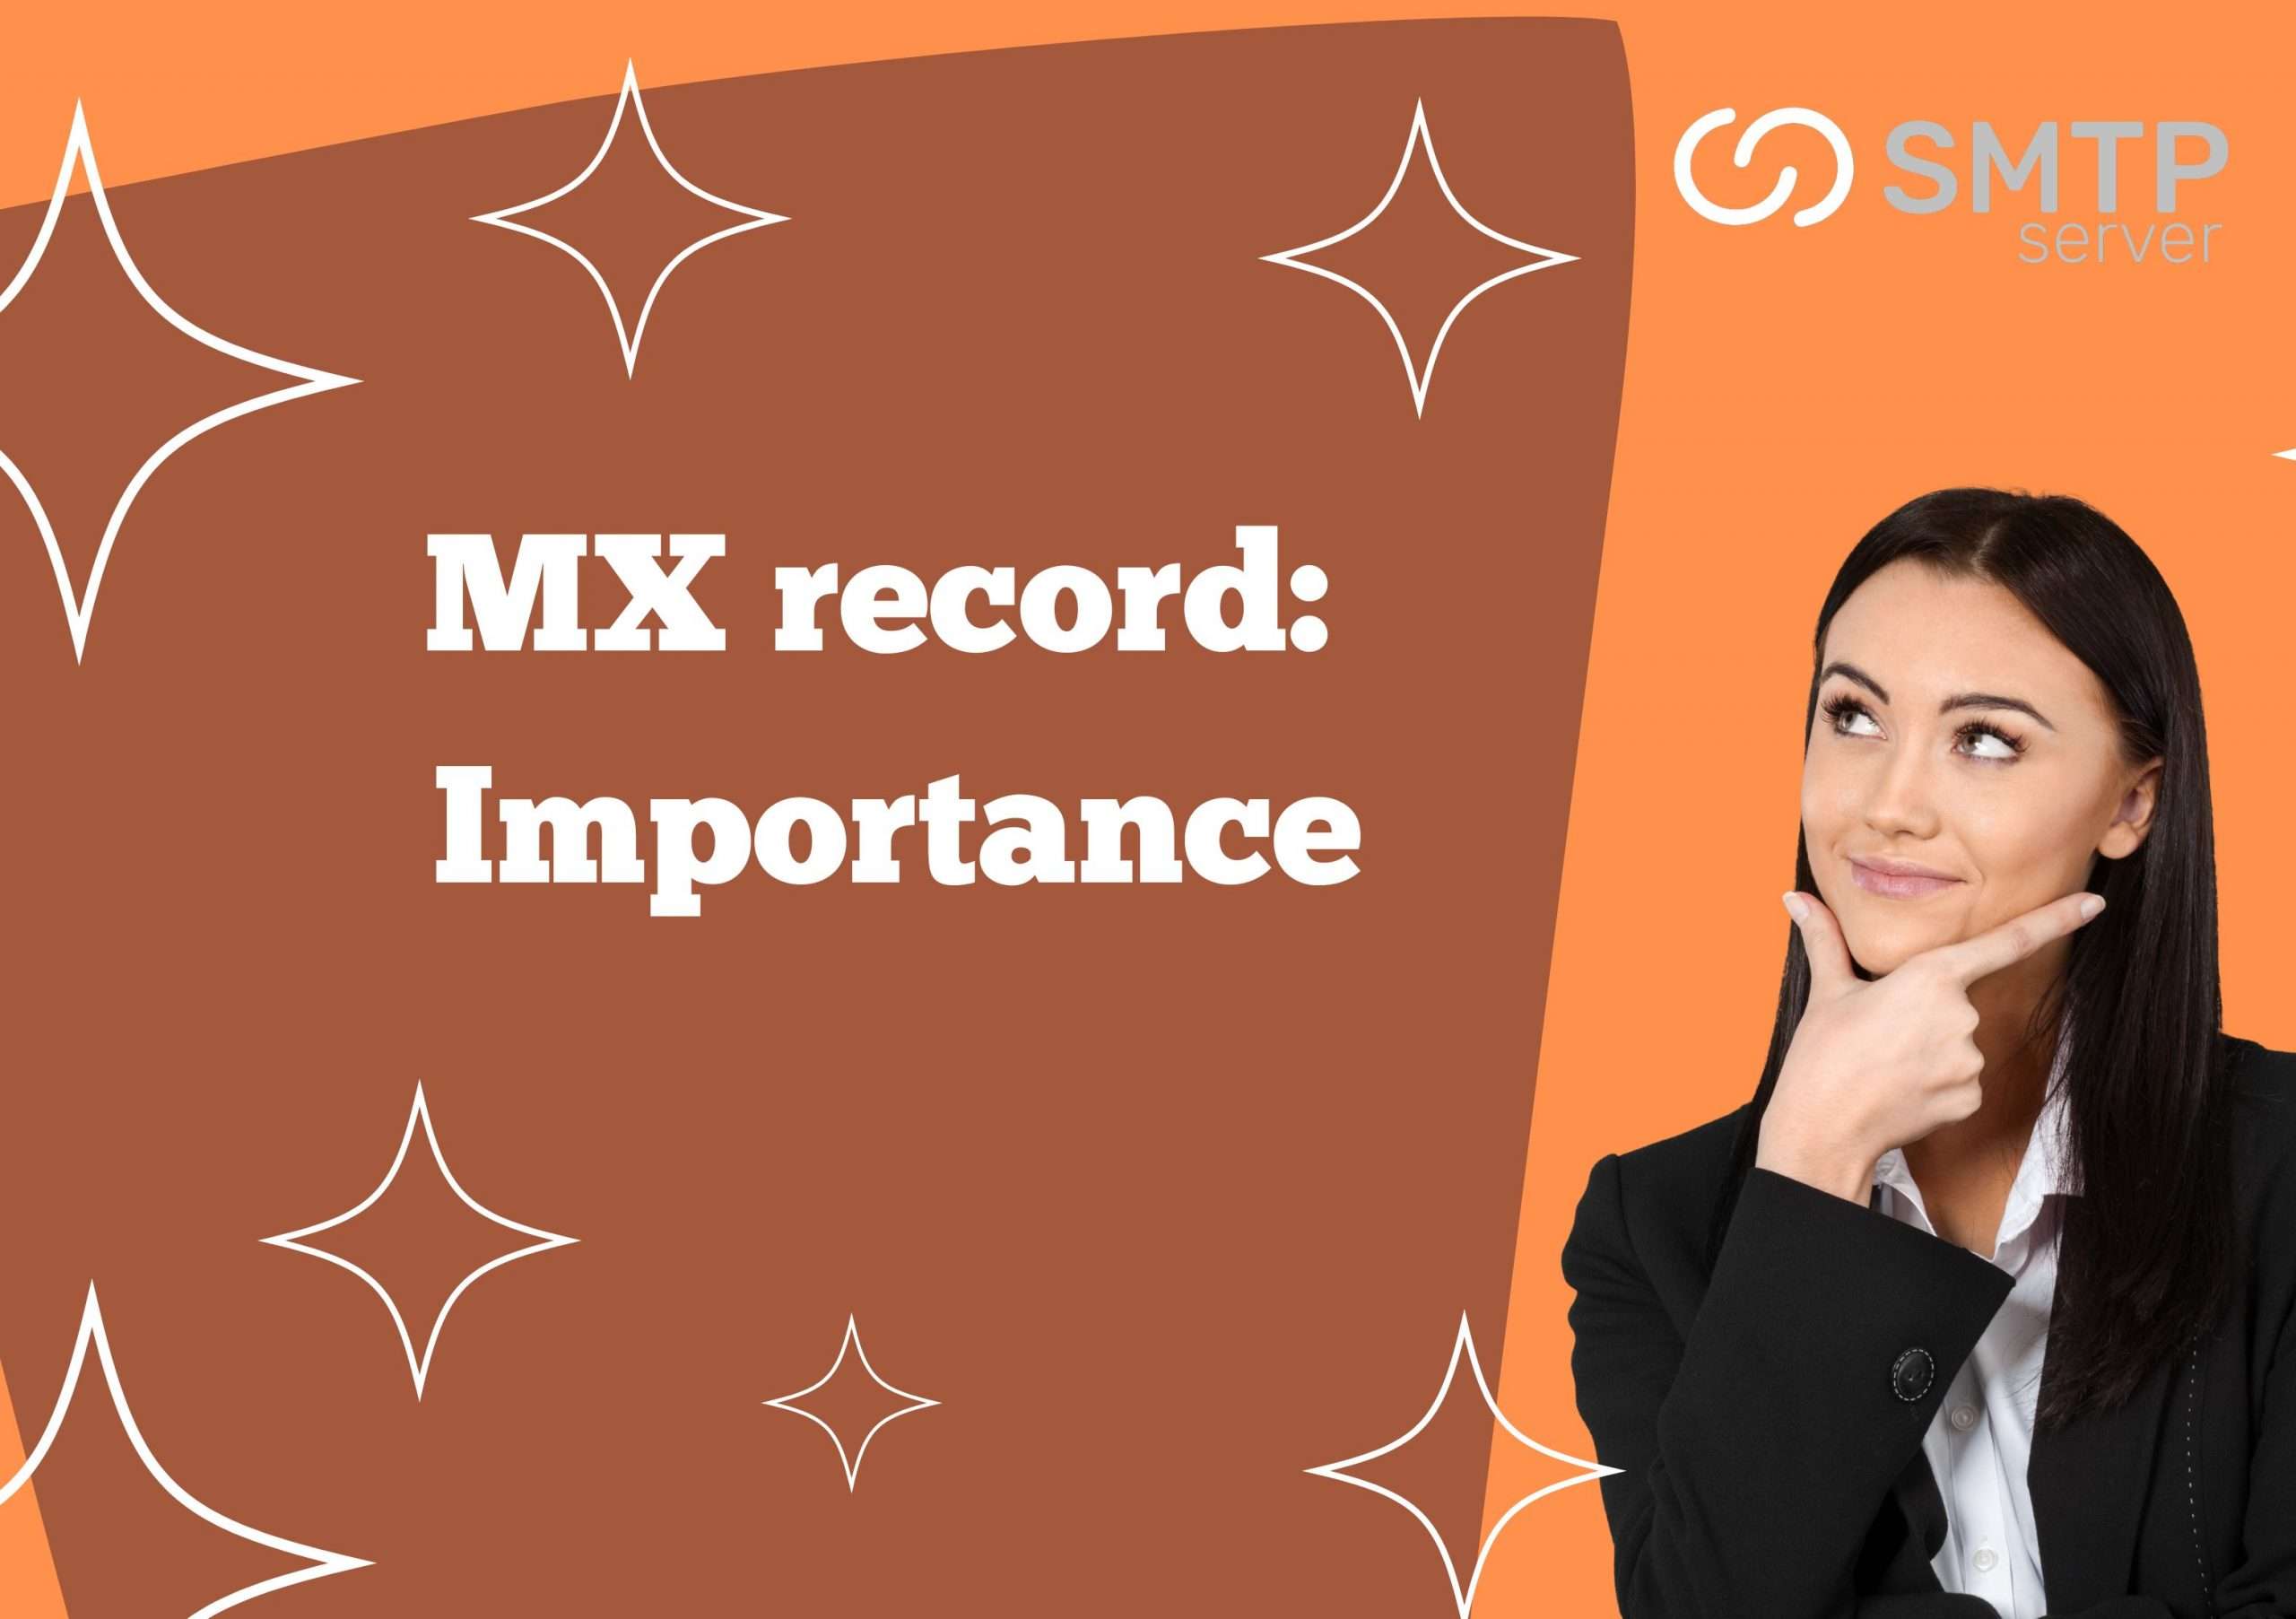 Importance of MX record